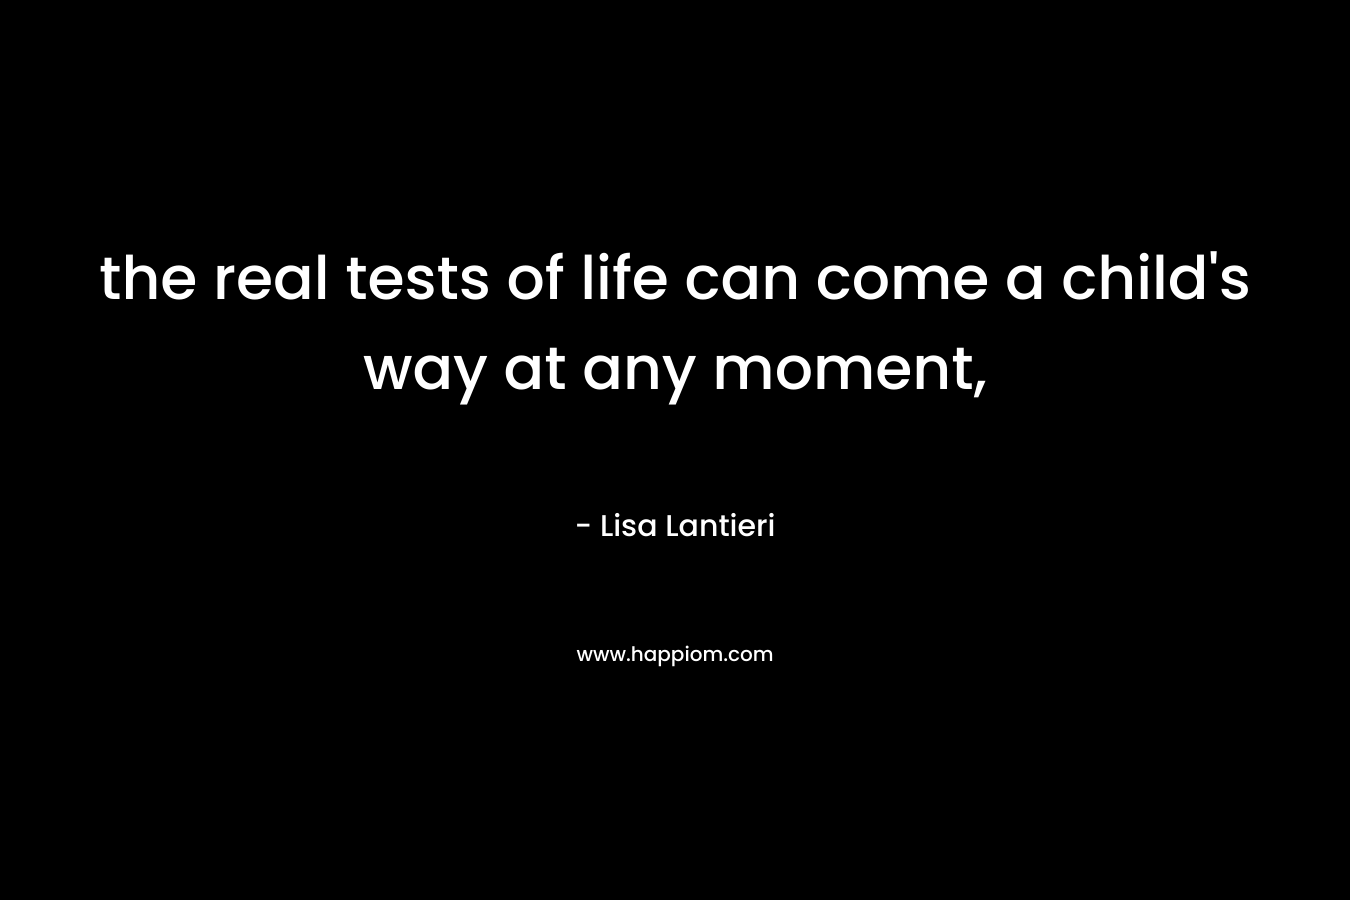 the real tests of life can come a child’s way at any moment, – Lisa Lantieri